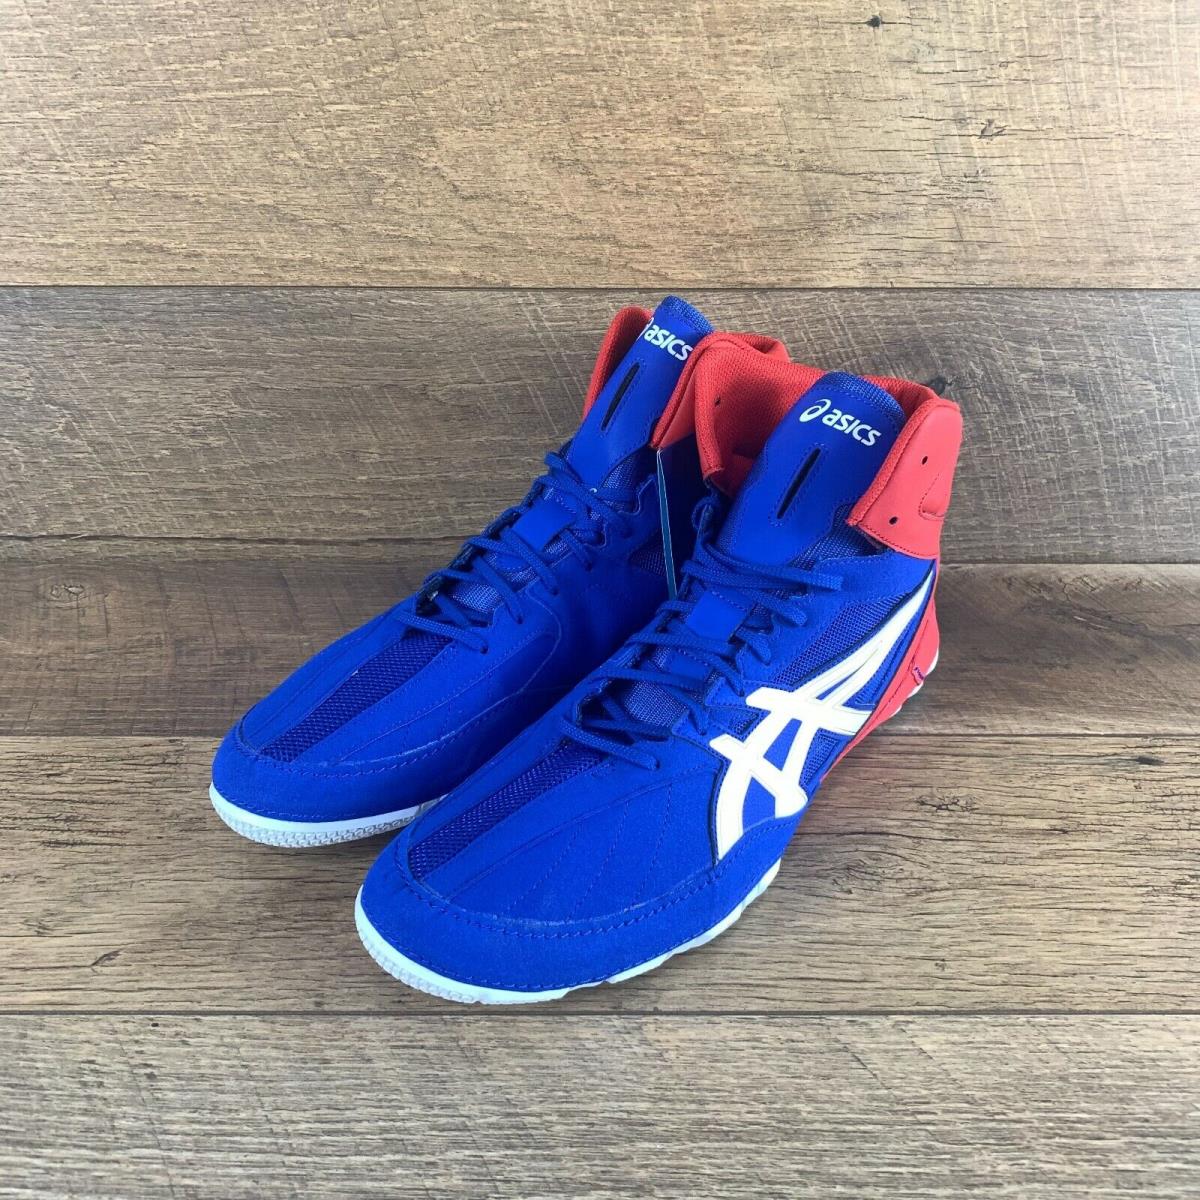 Asics Cael V8.0 Blue and Red 108A002-400 Wrestling Sneaker Men`s Size 15 US